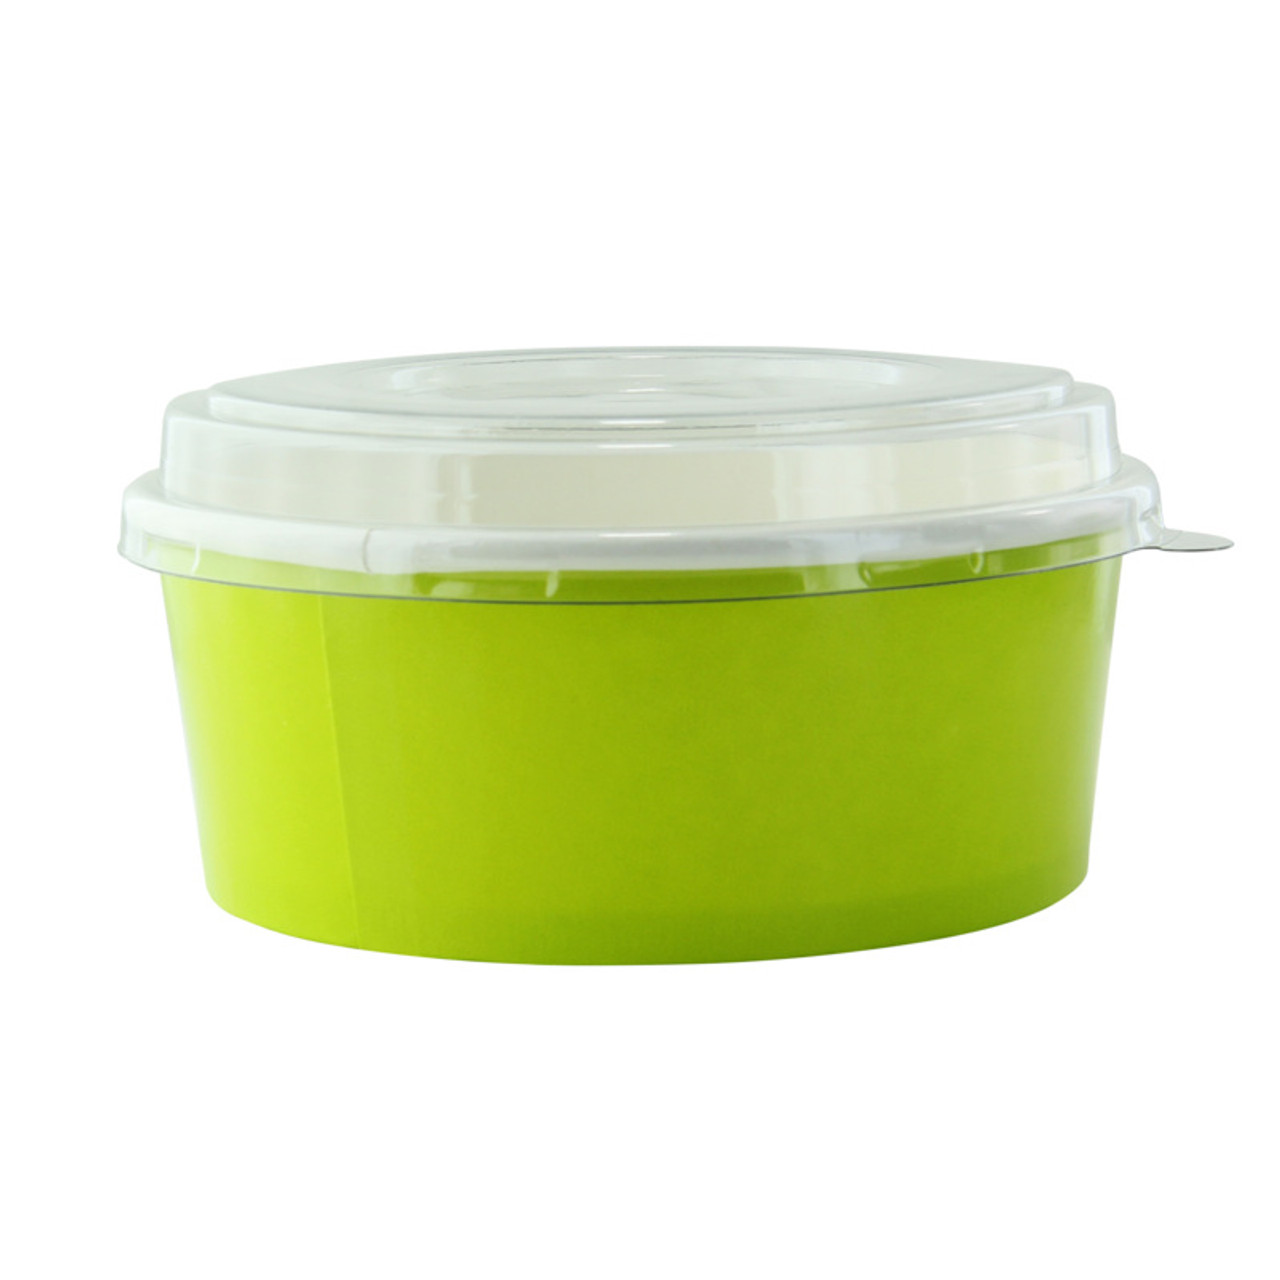 Bokocook reusable Weck glass jar with glass lid 5.5oz H:1.96in D:3.14in -  12 pcs - BioandChic